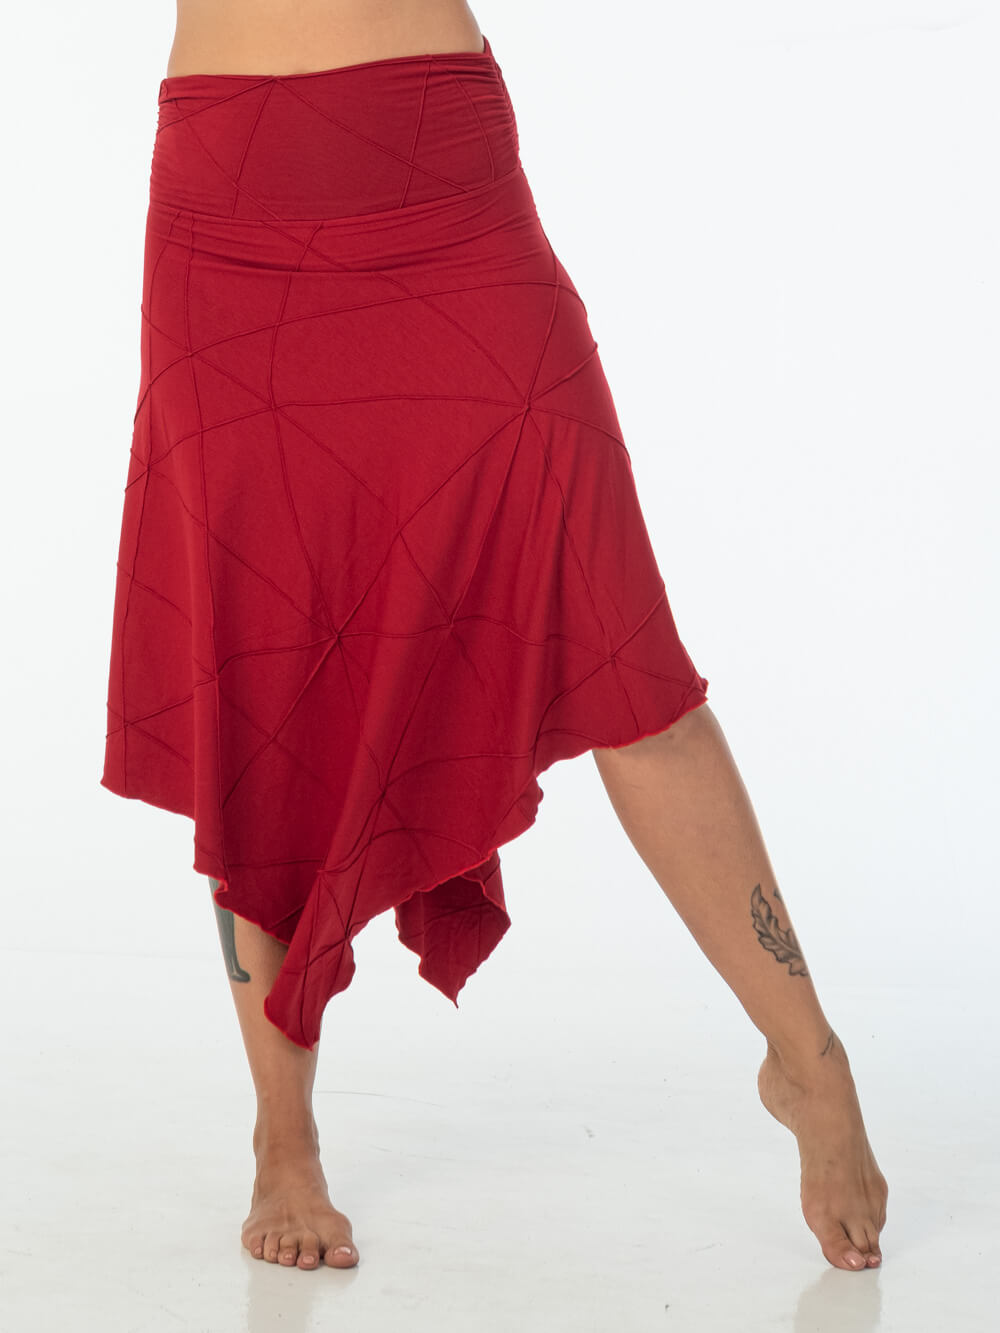 women's plant based rayon jersey stretchy asymmetrical red midi skirt with fold-over waistband #color_red